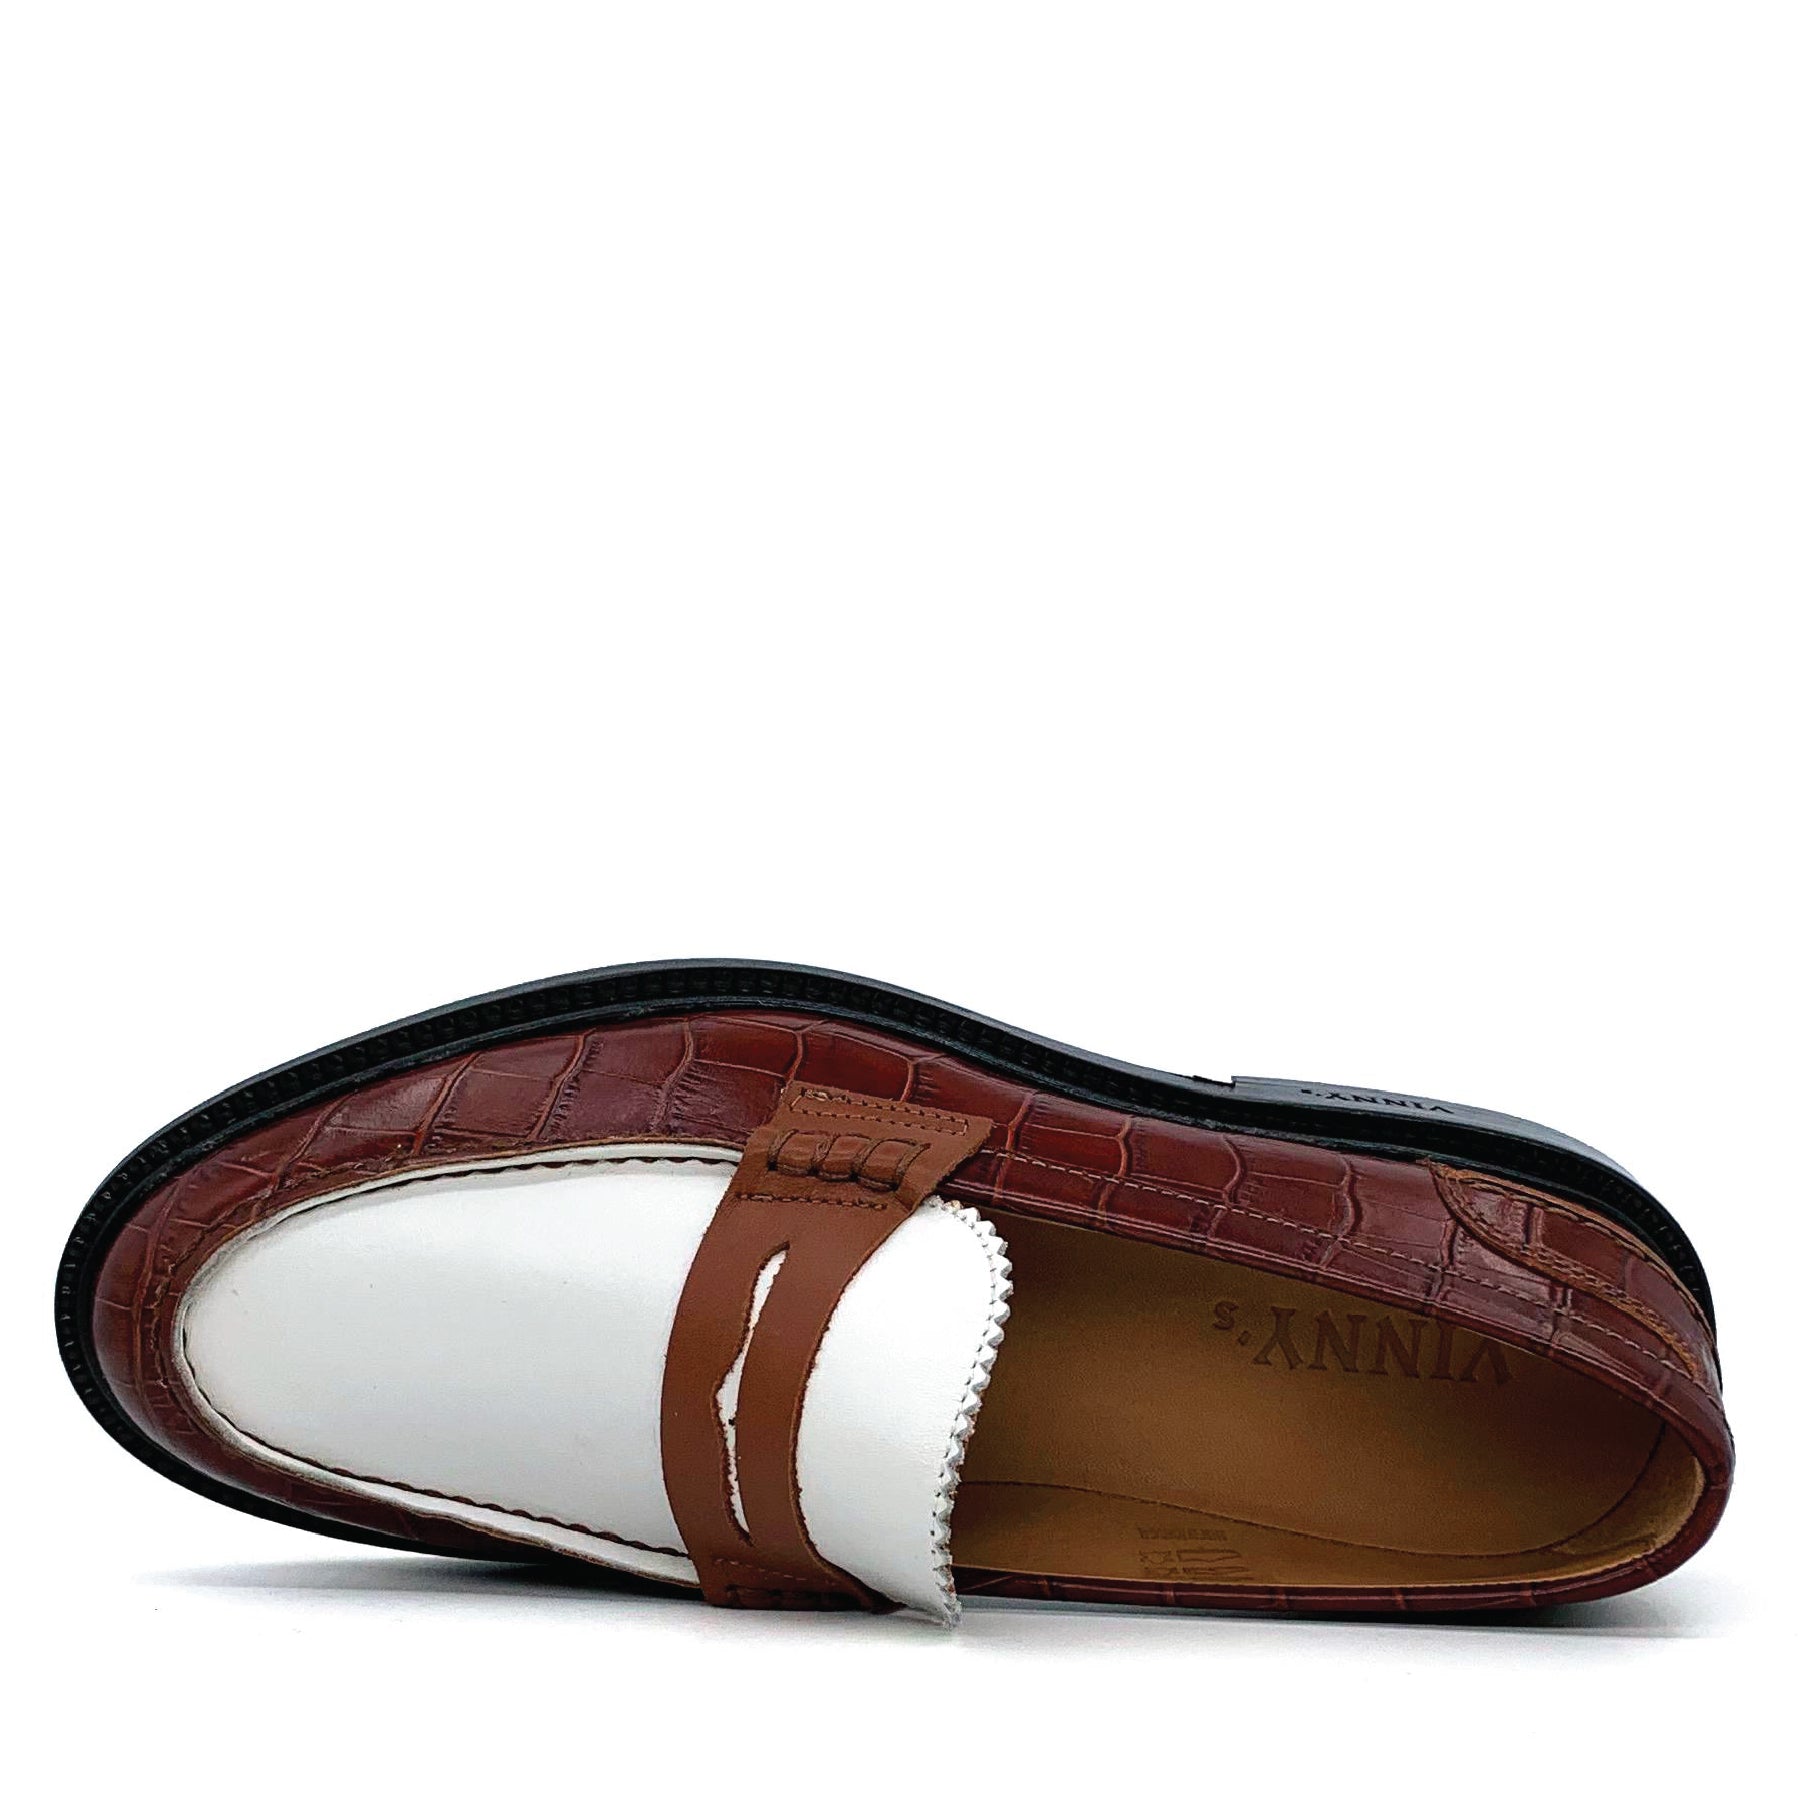 Townee Penny Loafer Brown croc / White / Brown Women